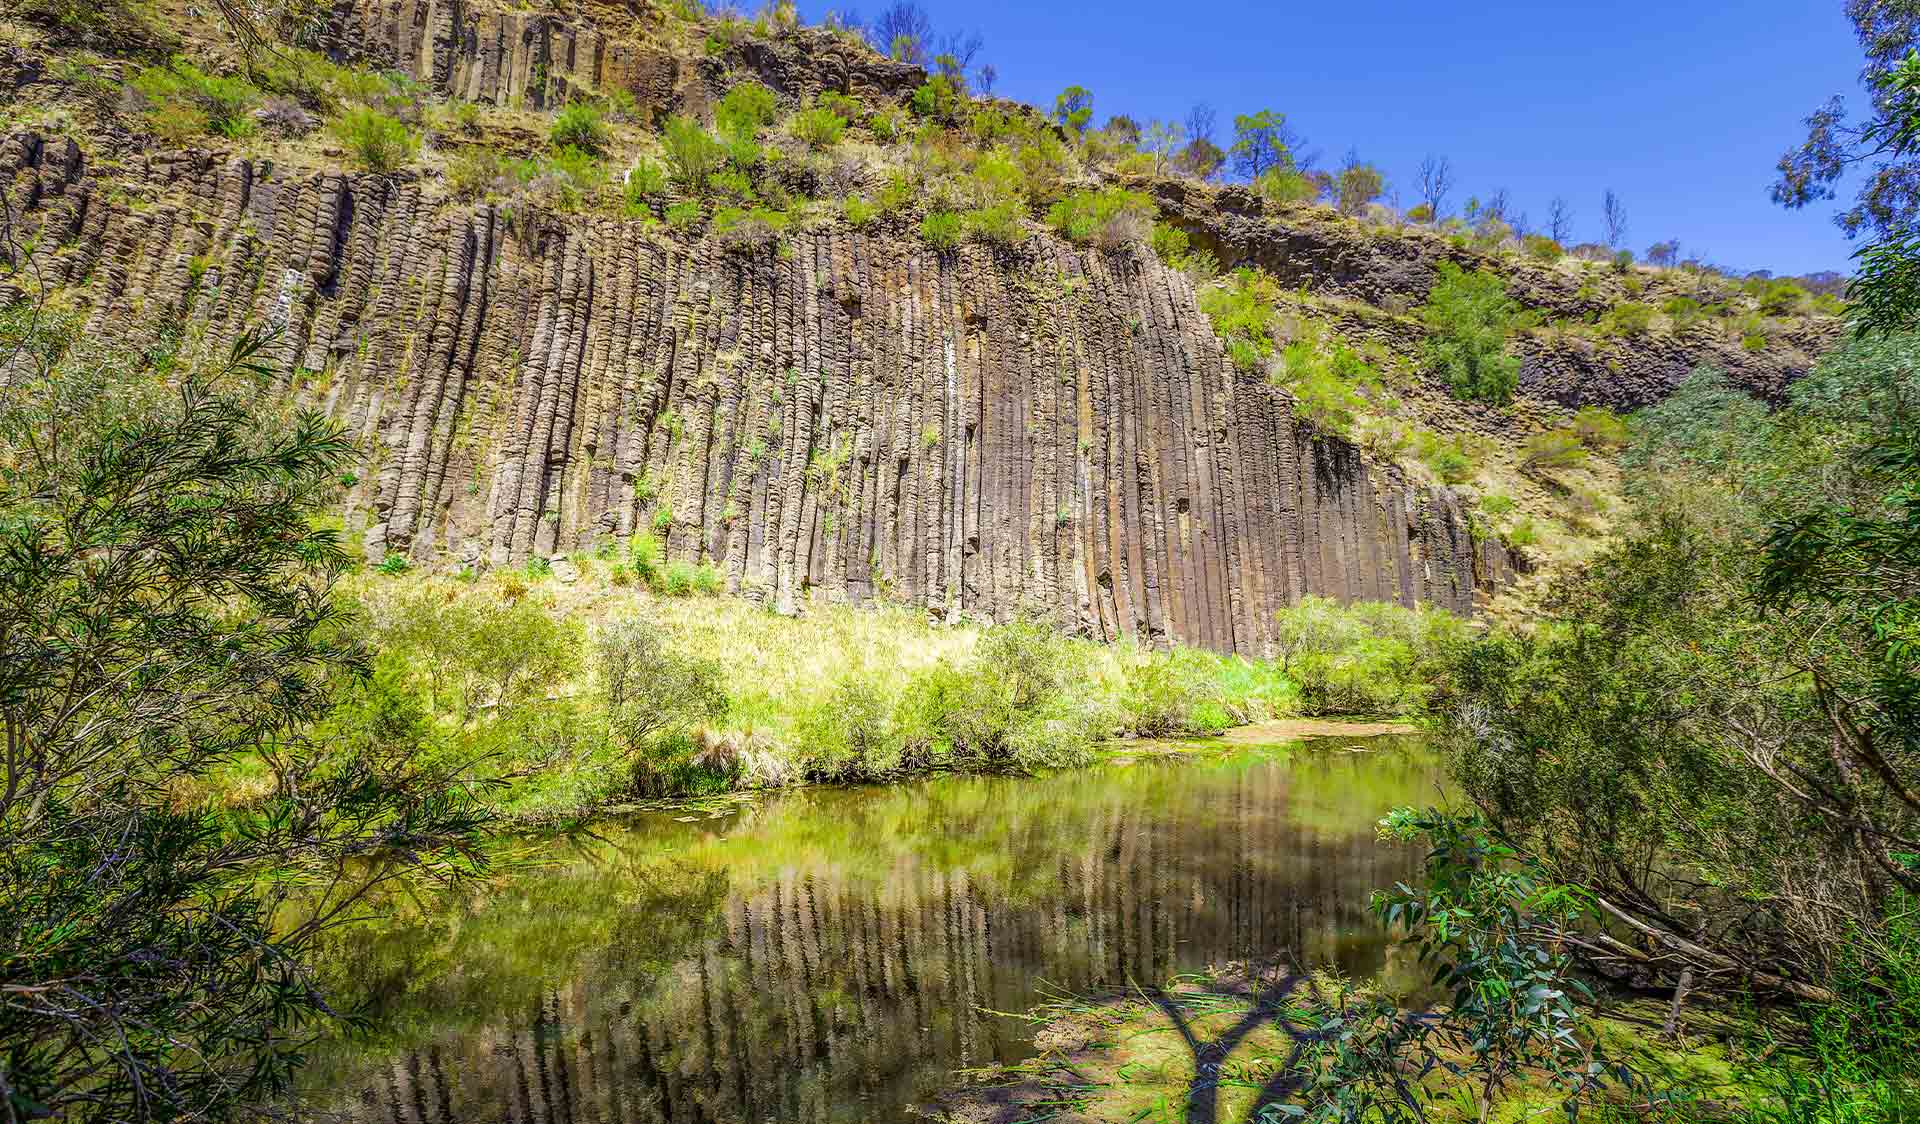 The rock formation know as the Organ Pipes from which the national park is named